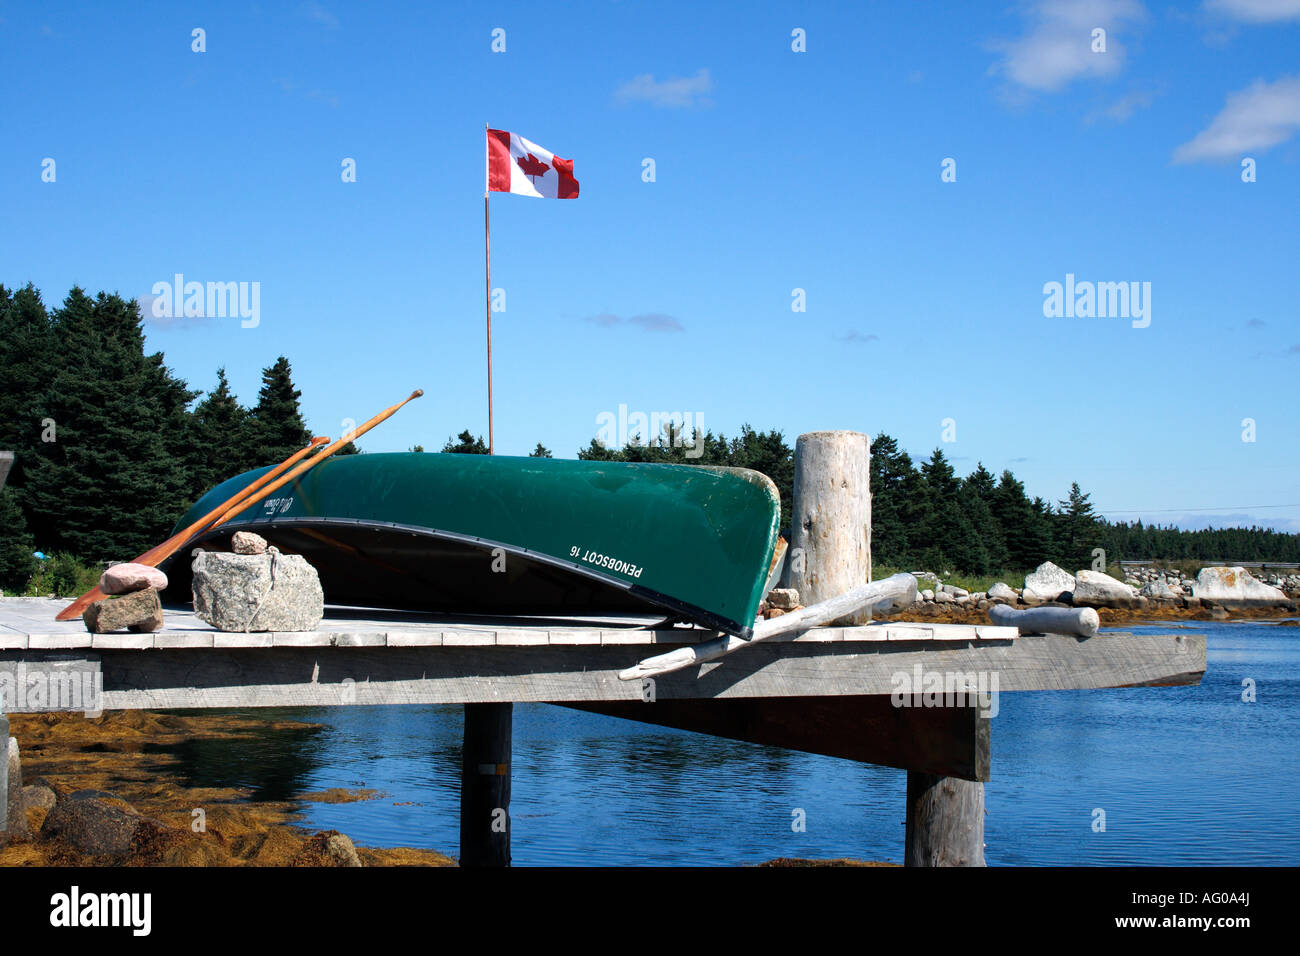 jetty upside down Old Town canoe, paddle and Canadian  Maple Leaf Flag, Nova Scotia, Atlantic Canada. Photo by Willy Matheisl Stock Photo